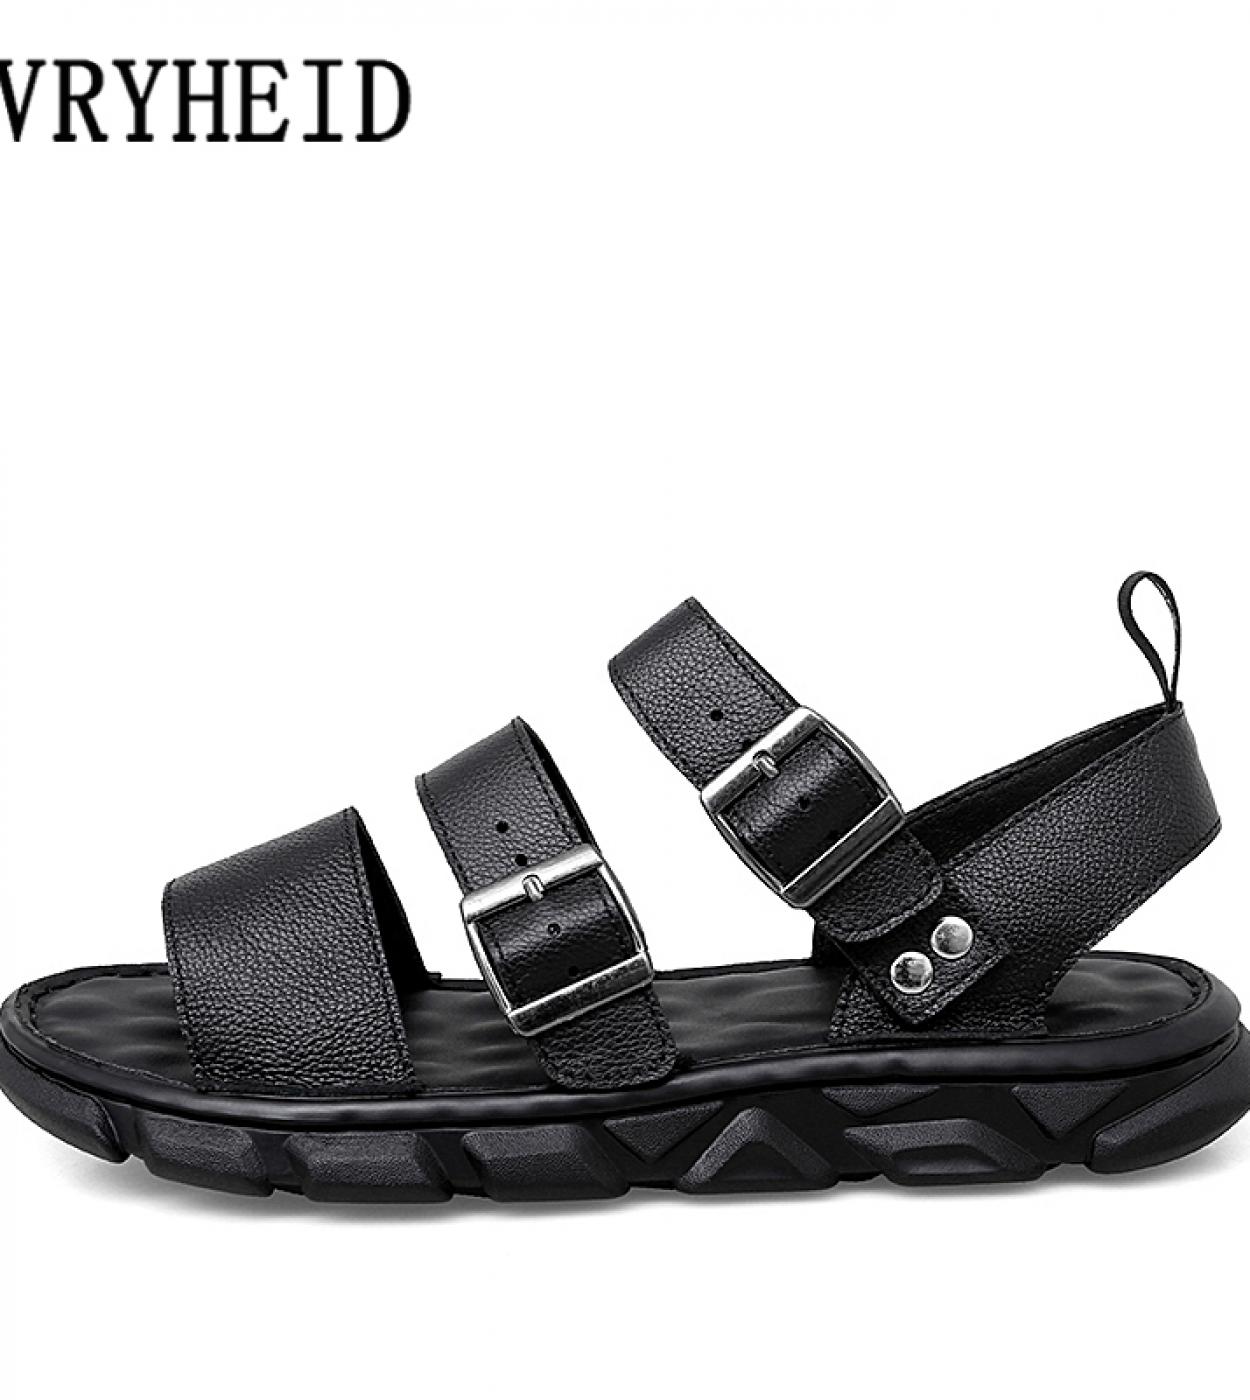 Vryheid New Summer Mens Sandals Genuine Leather Luxury Beach Wading Shoes Nonslip Outdoors Sport Casual Fashion Designe